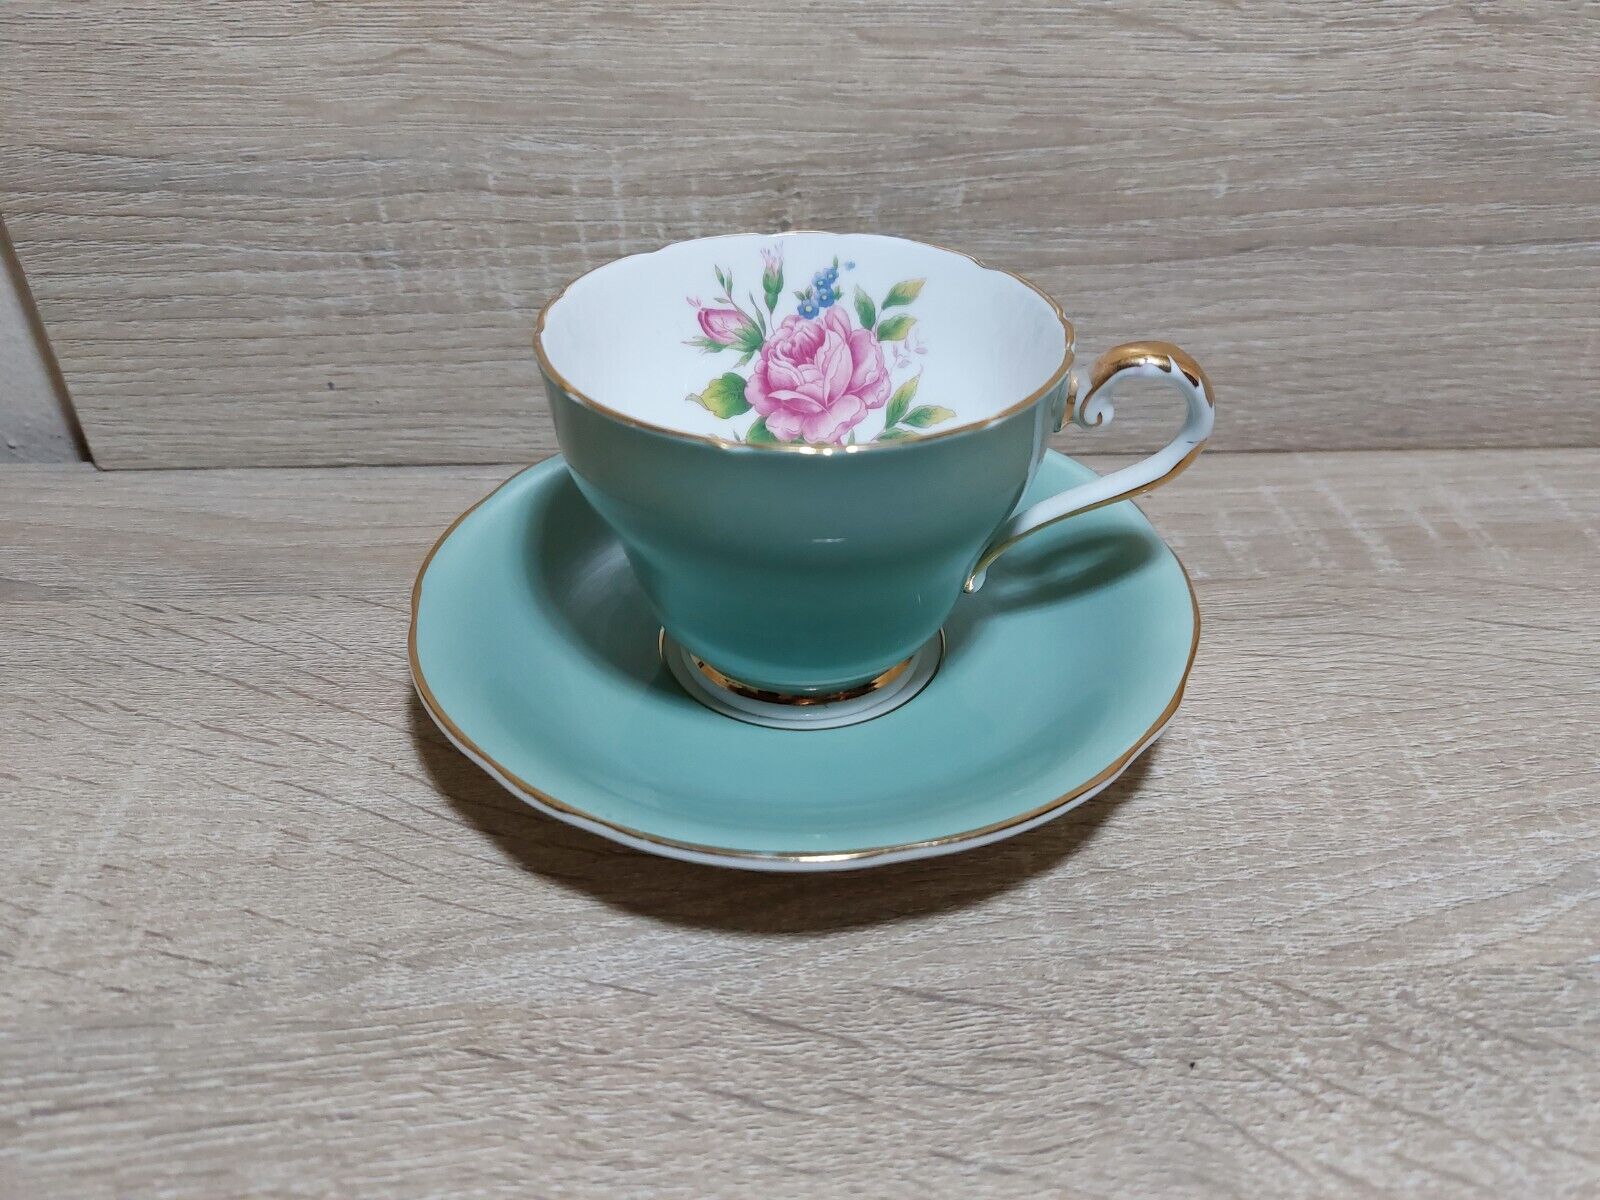 Aynsley Cup and Saucer, Bone china from England, turquoise w/florals